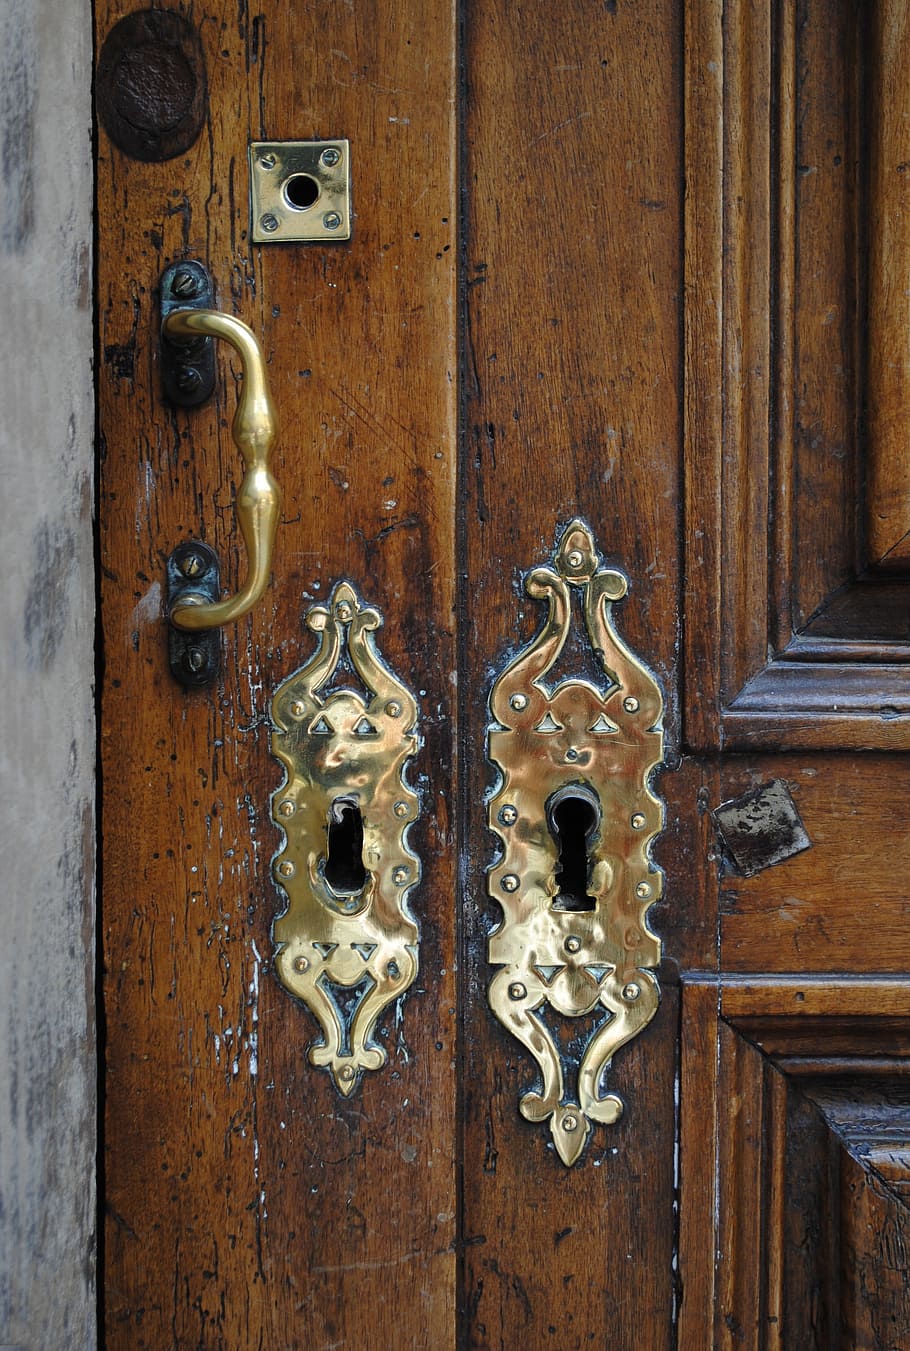 door, fittings, brass, wood, castle, handle, old, entrance, wood - material, safety